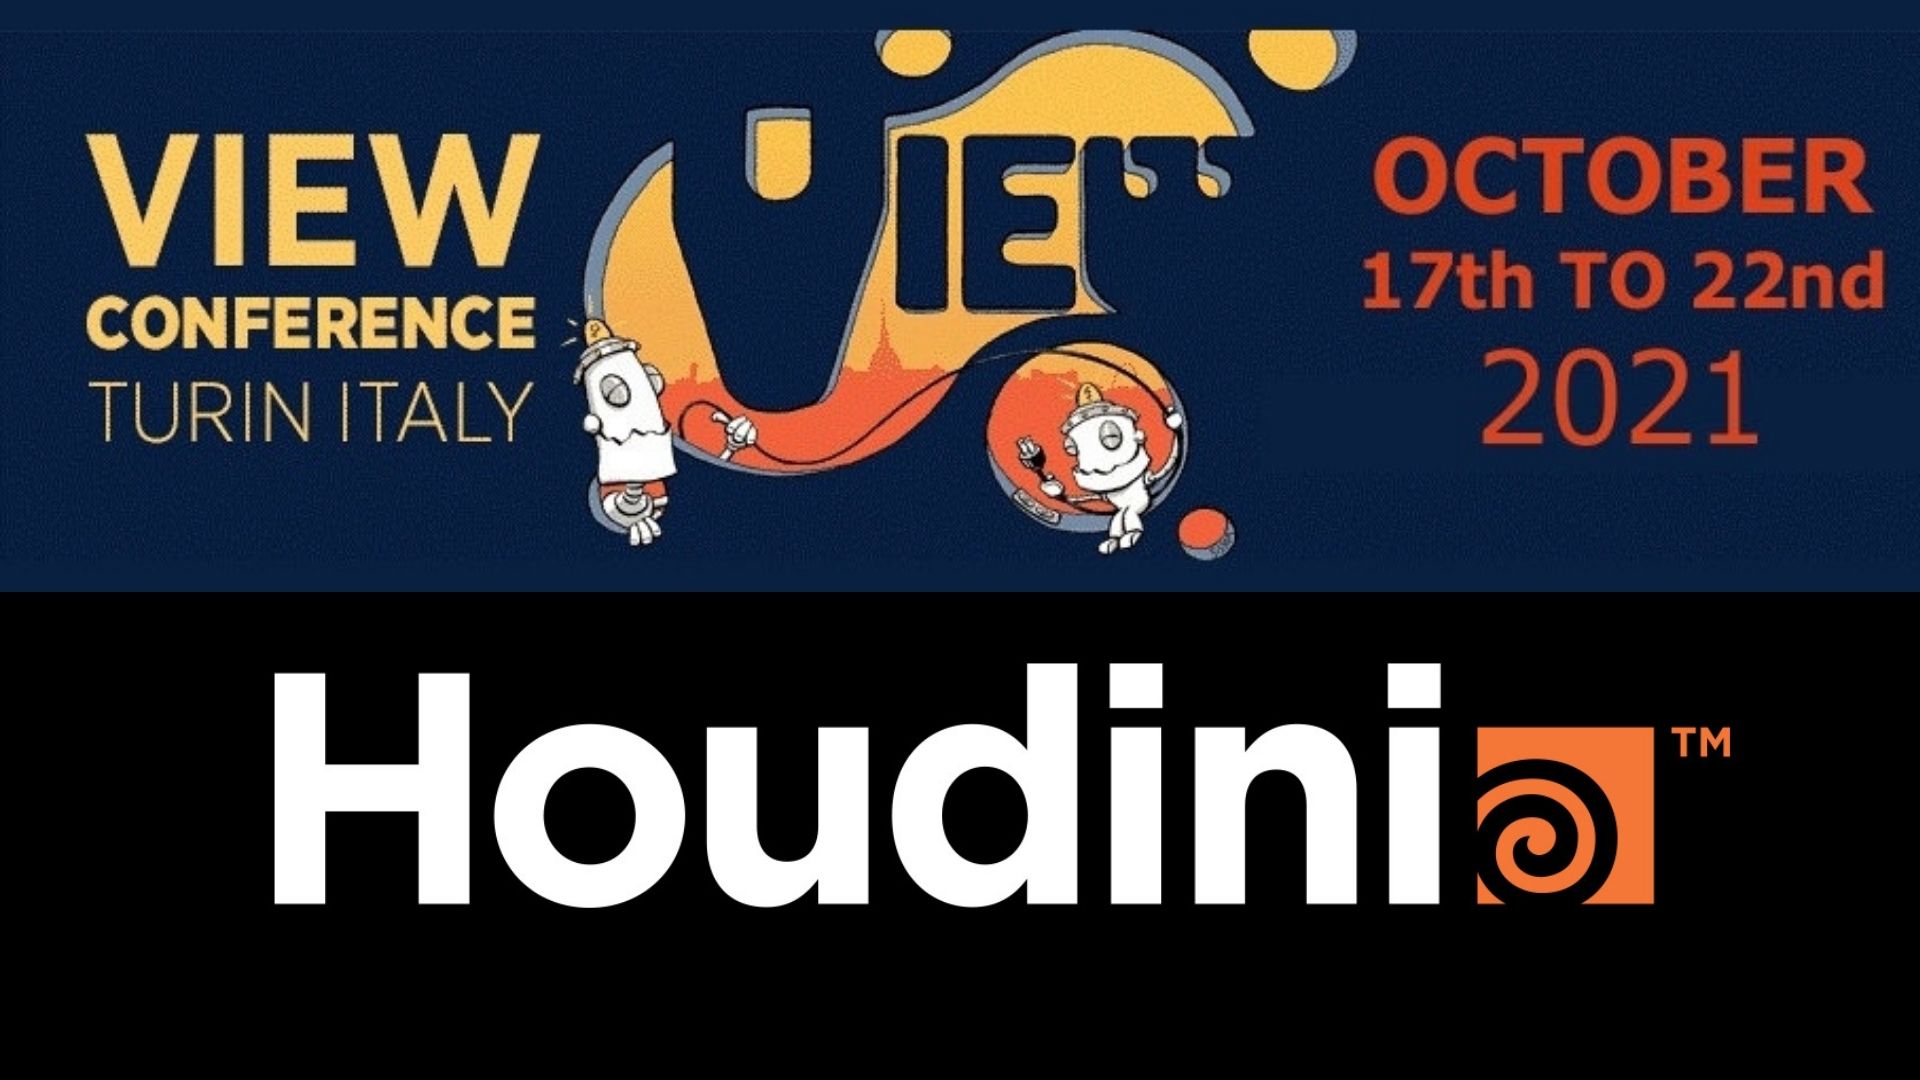 SideFX Reveals New Houdini 19 Software at VIEW Conference 2021